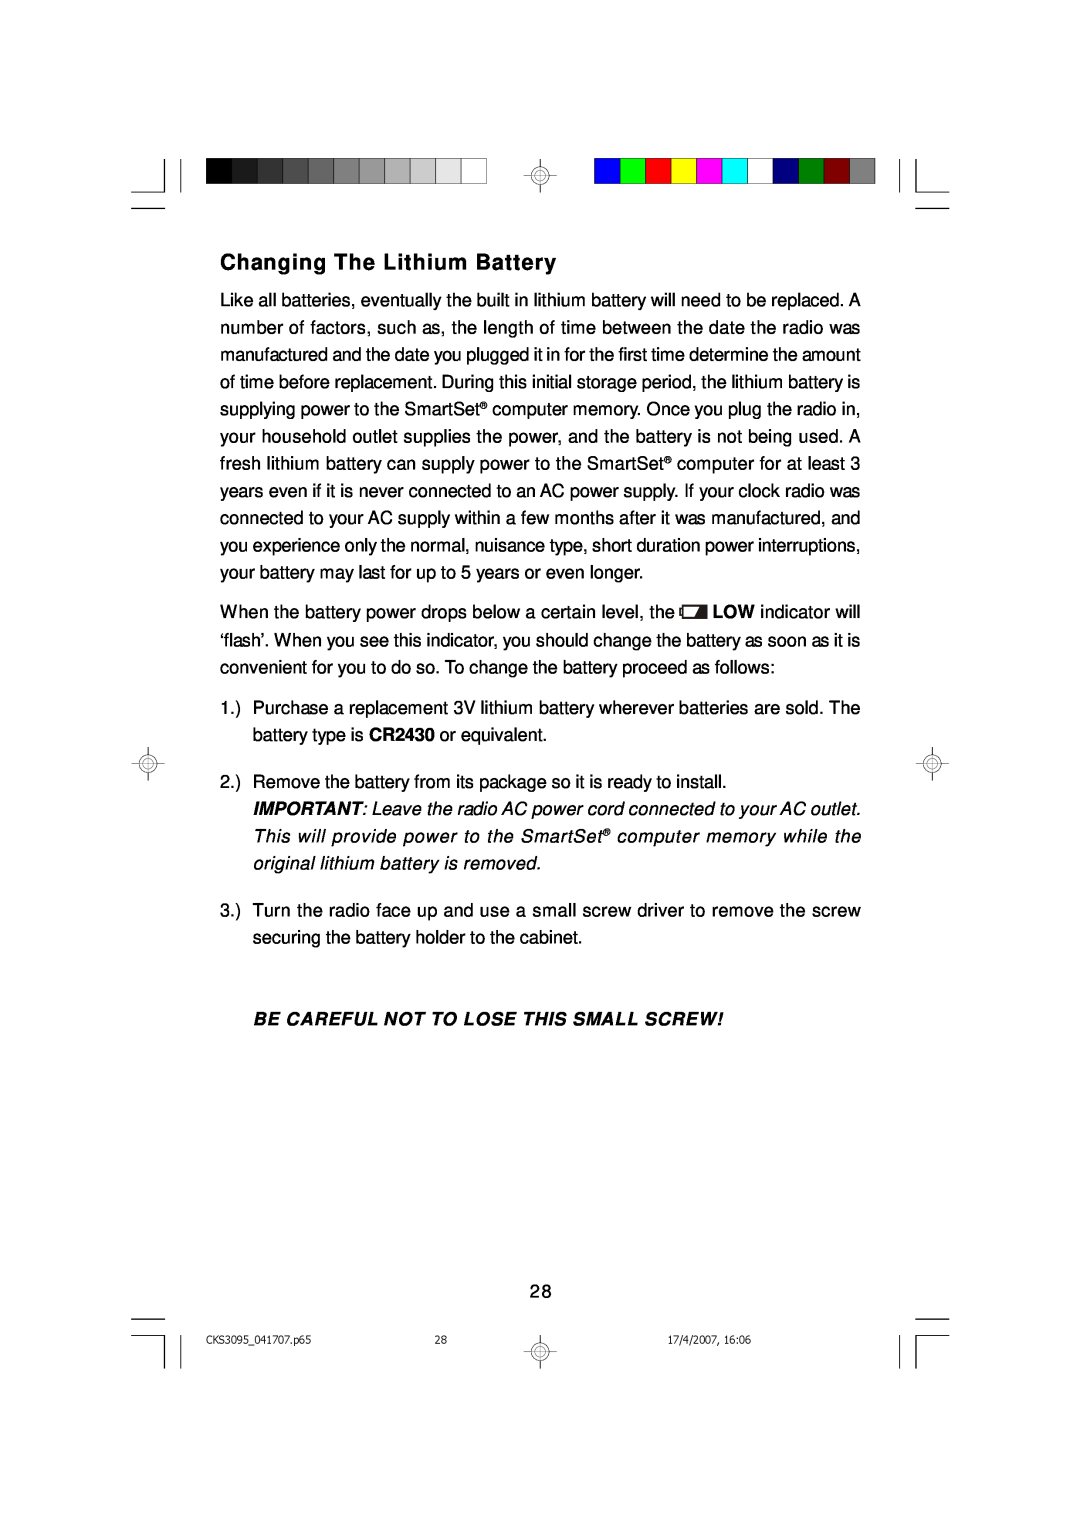 Emerson CKS3095B, CKS3095S owner manual Changing The Lithium Battery, Be Careful Not To Lose This Small Screw 